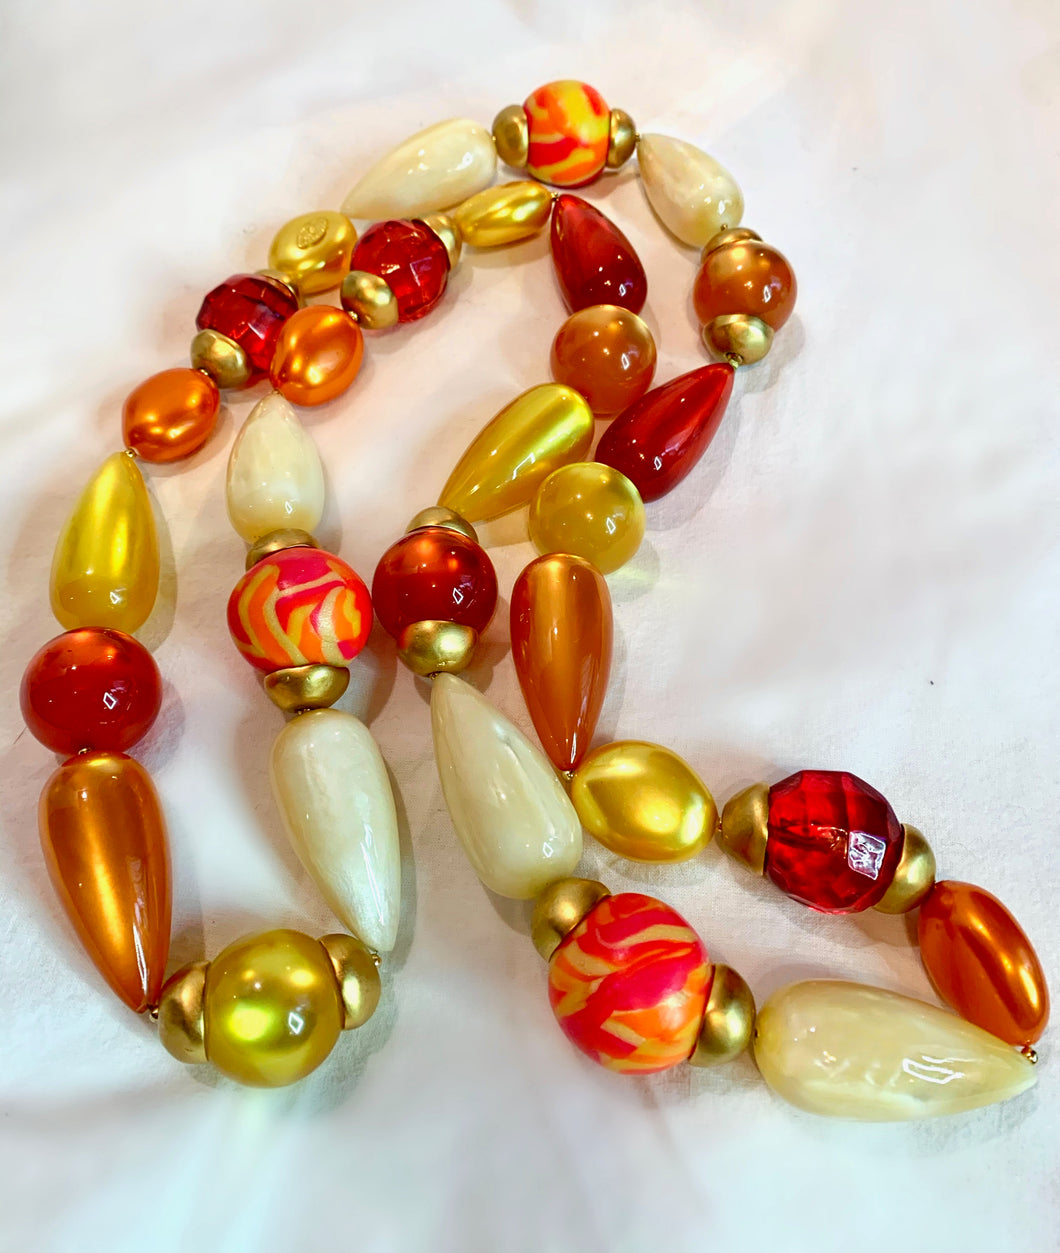 CHANEL GRIPOIX RARE GLASS PEARL AND BEAD CHUNKY MASSIVE VINTAGE SAUTOIR NECKLACE